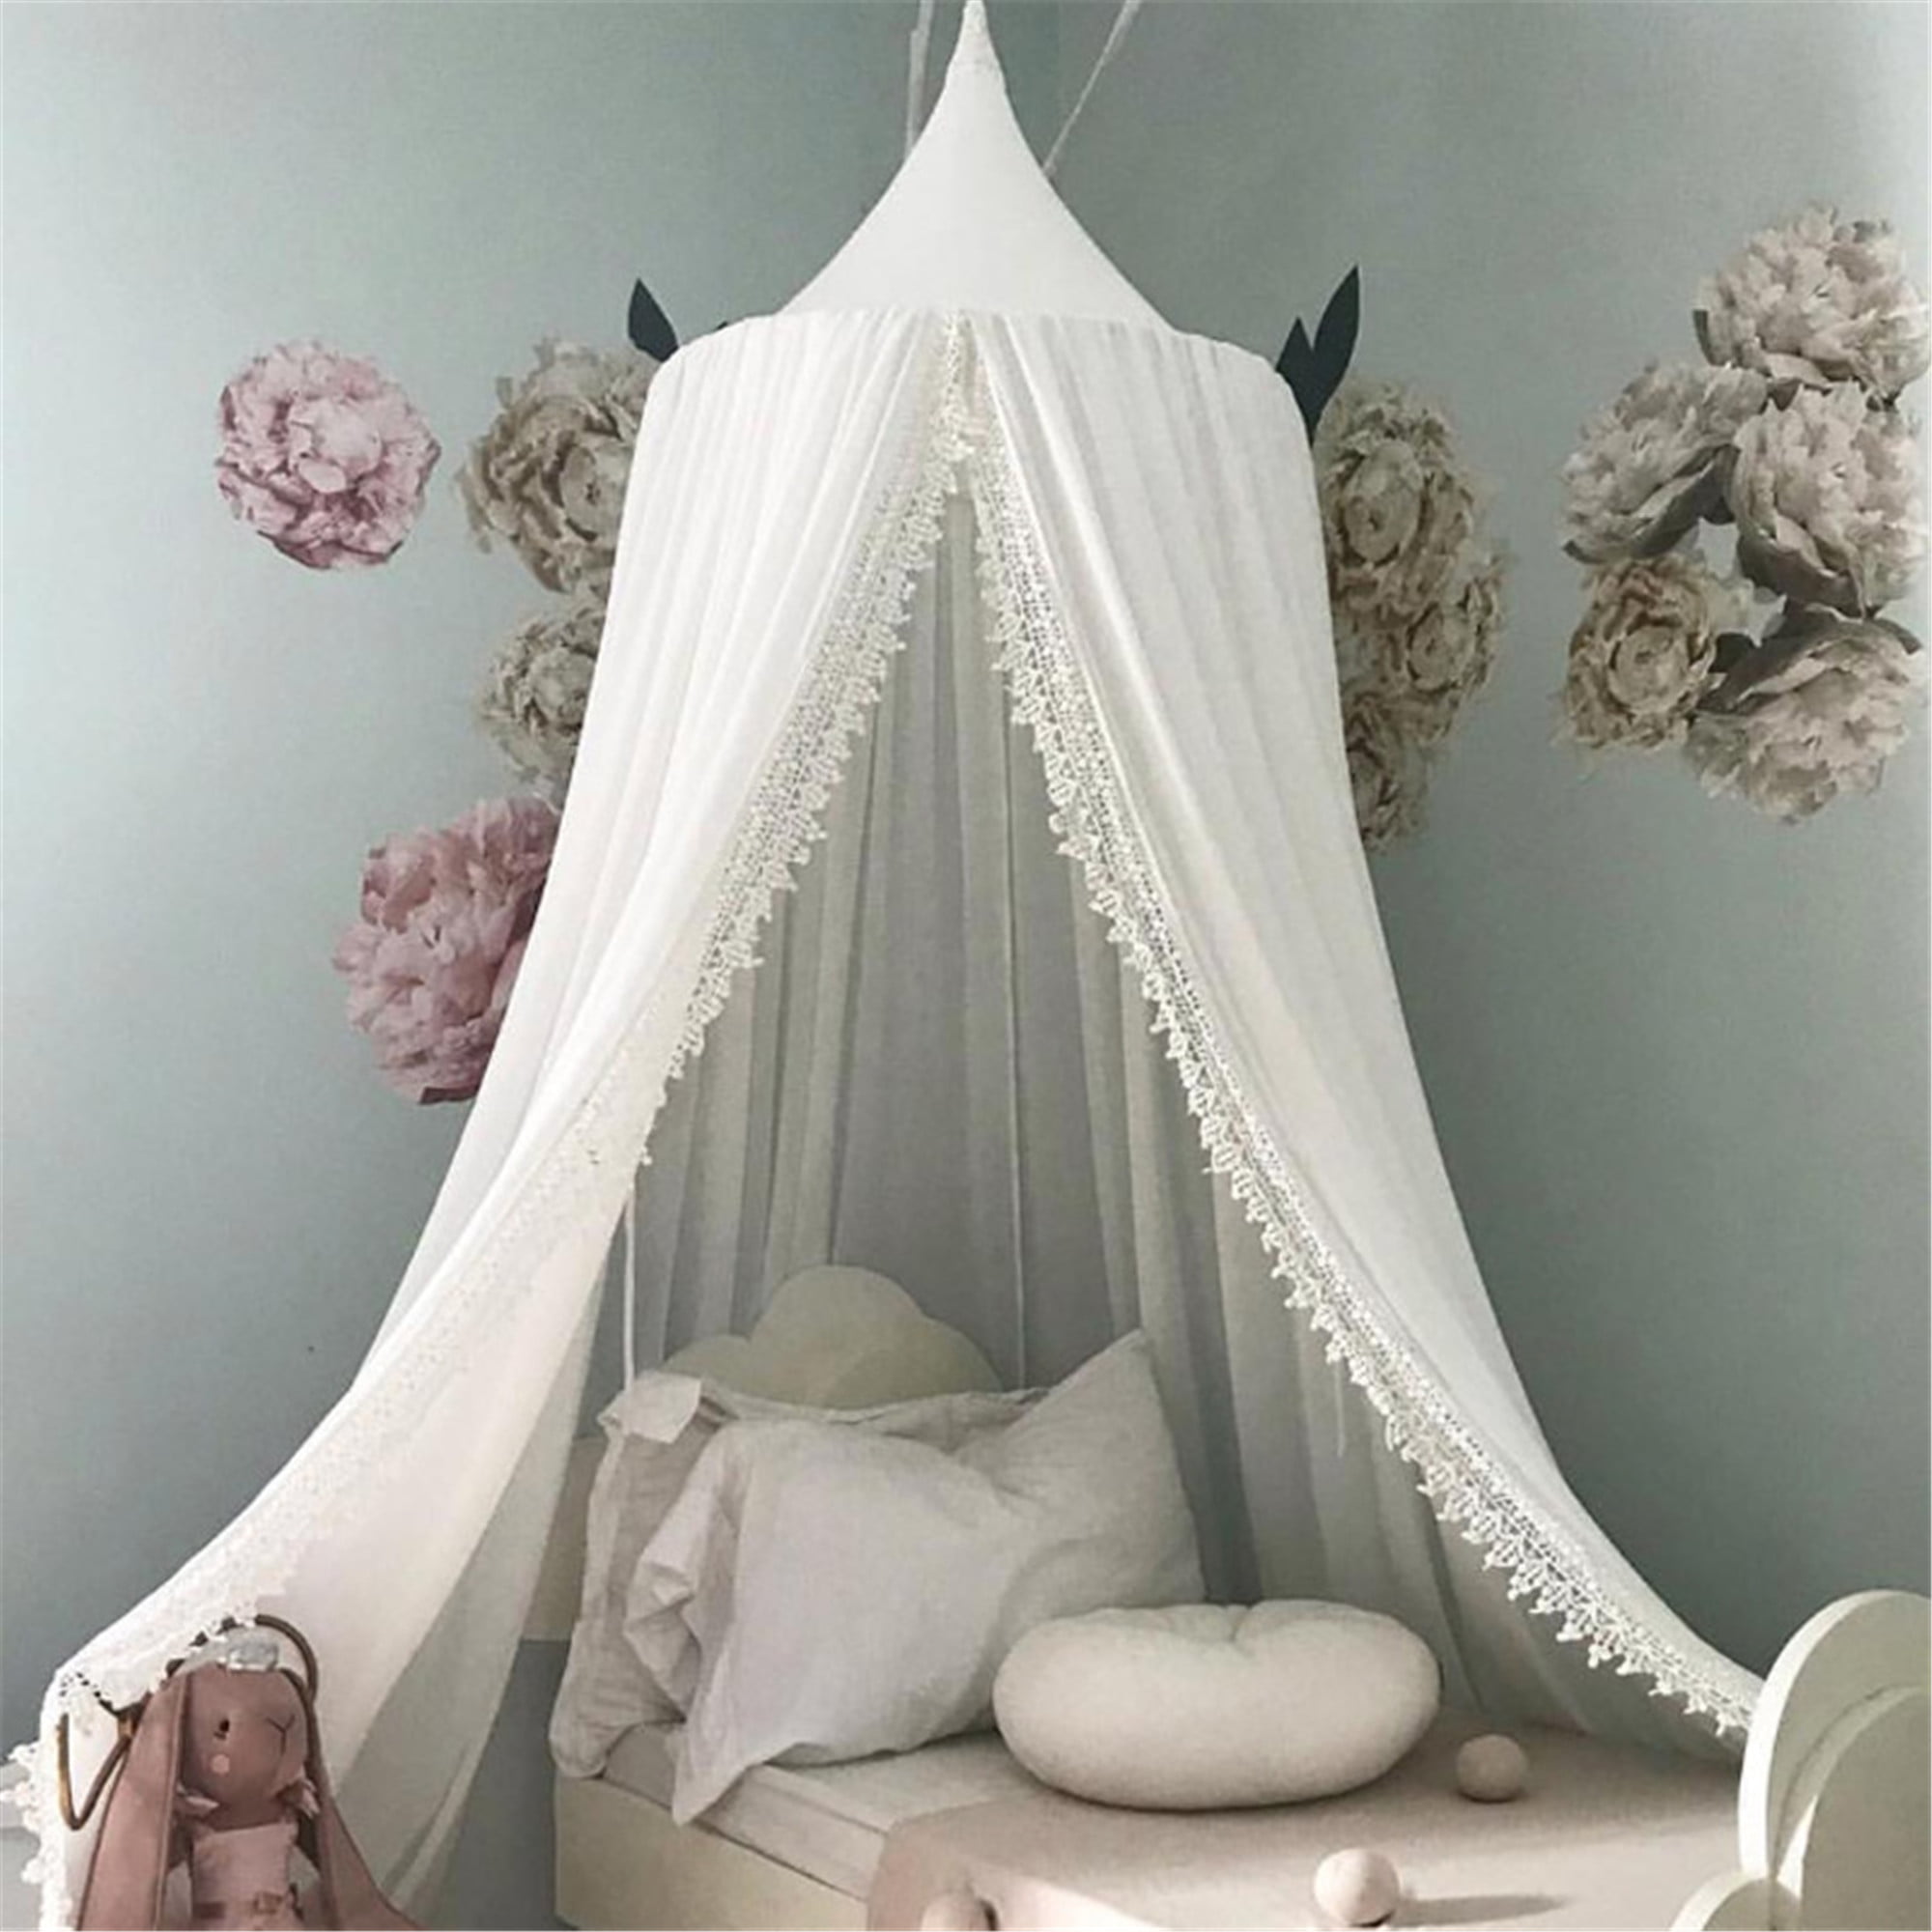 Baby Indoor Outdoor Play Reading Tent White Bed & Bedroom Decoration Princess Bed Canopy Insect Net Protection Mosqutio Net Hanging Curtain-Beautiful Childrens Bed Canopy in White